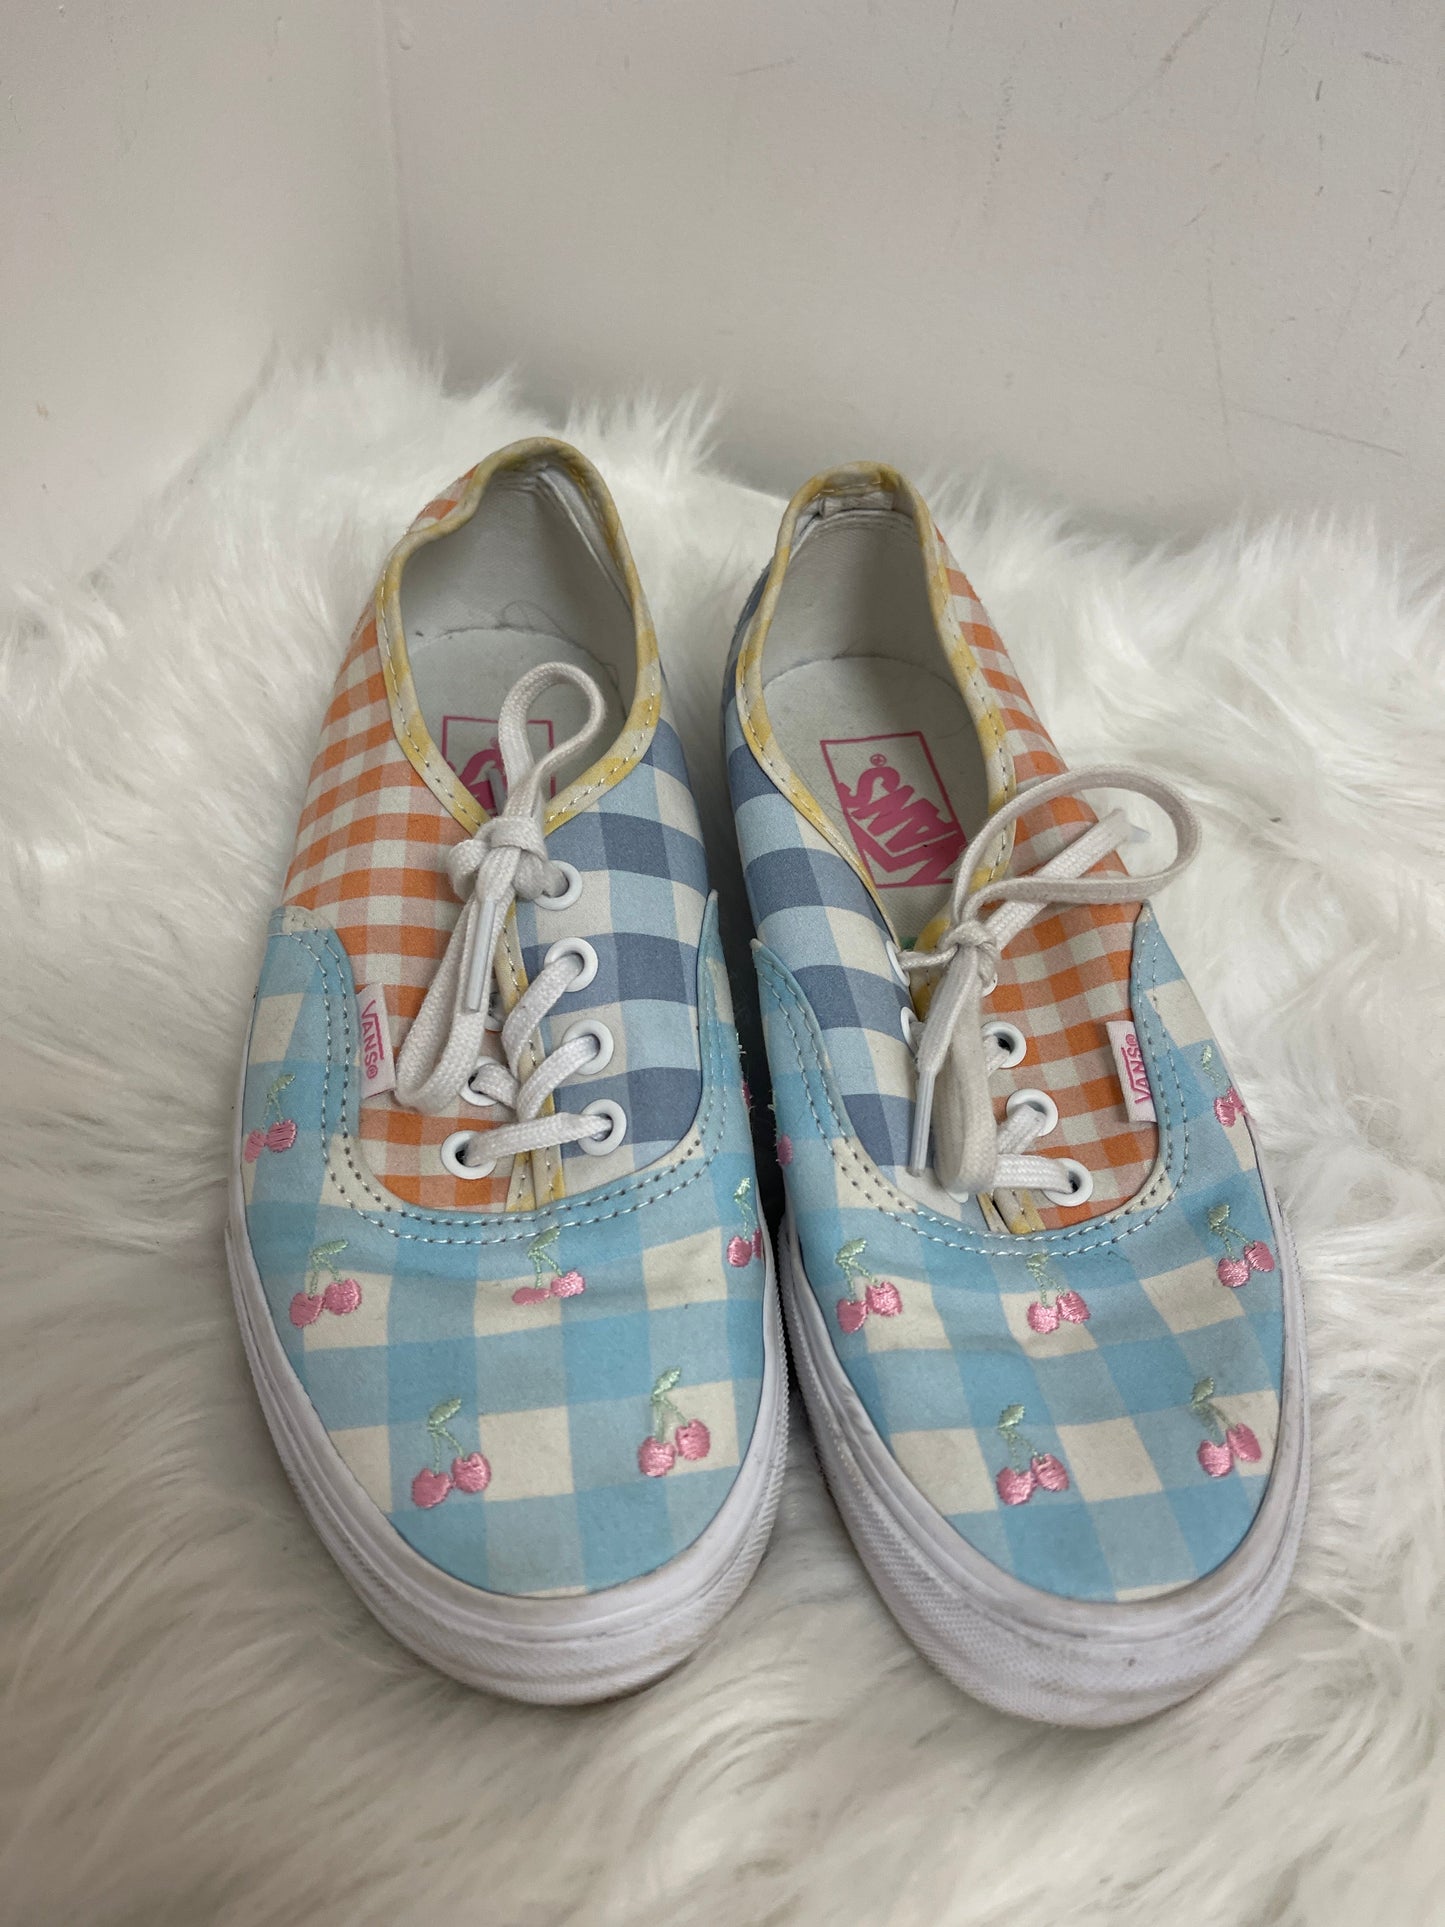 Multi-colored Shoes Sneakers Vans, Size 7